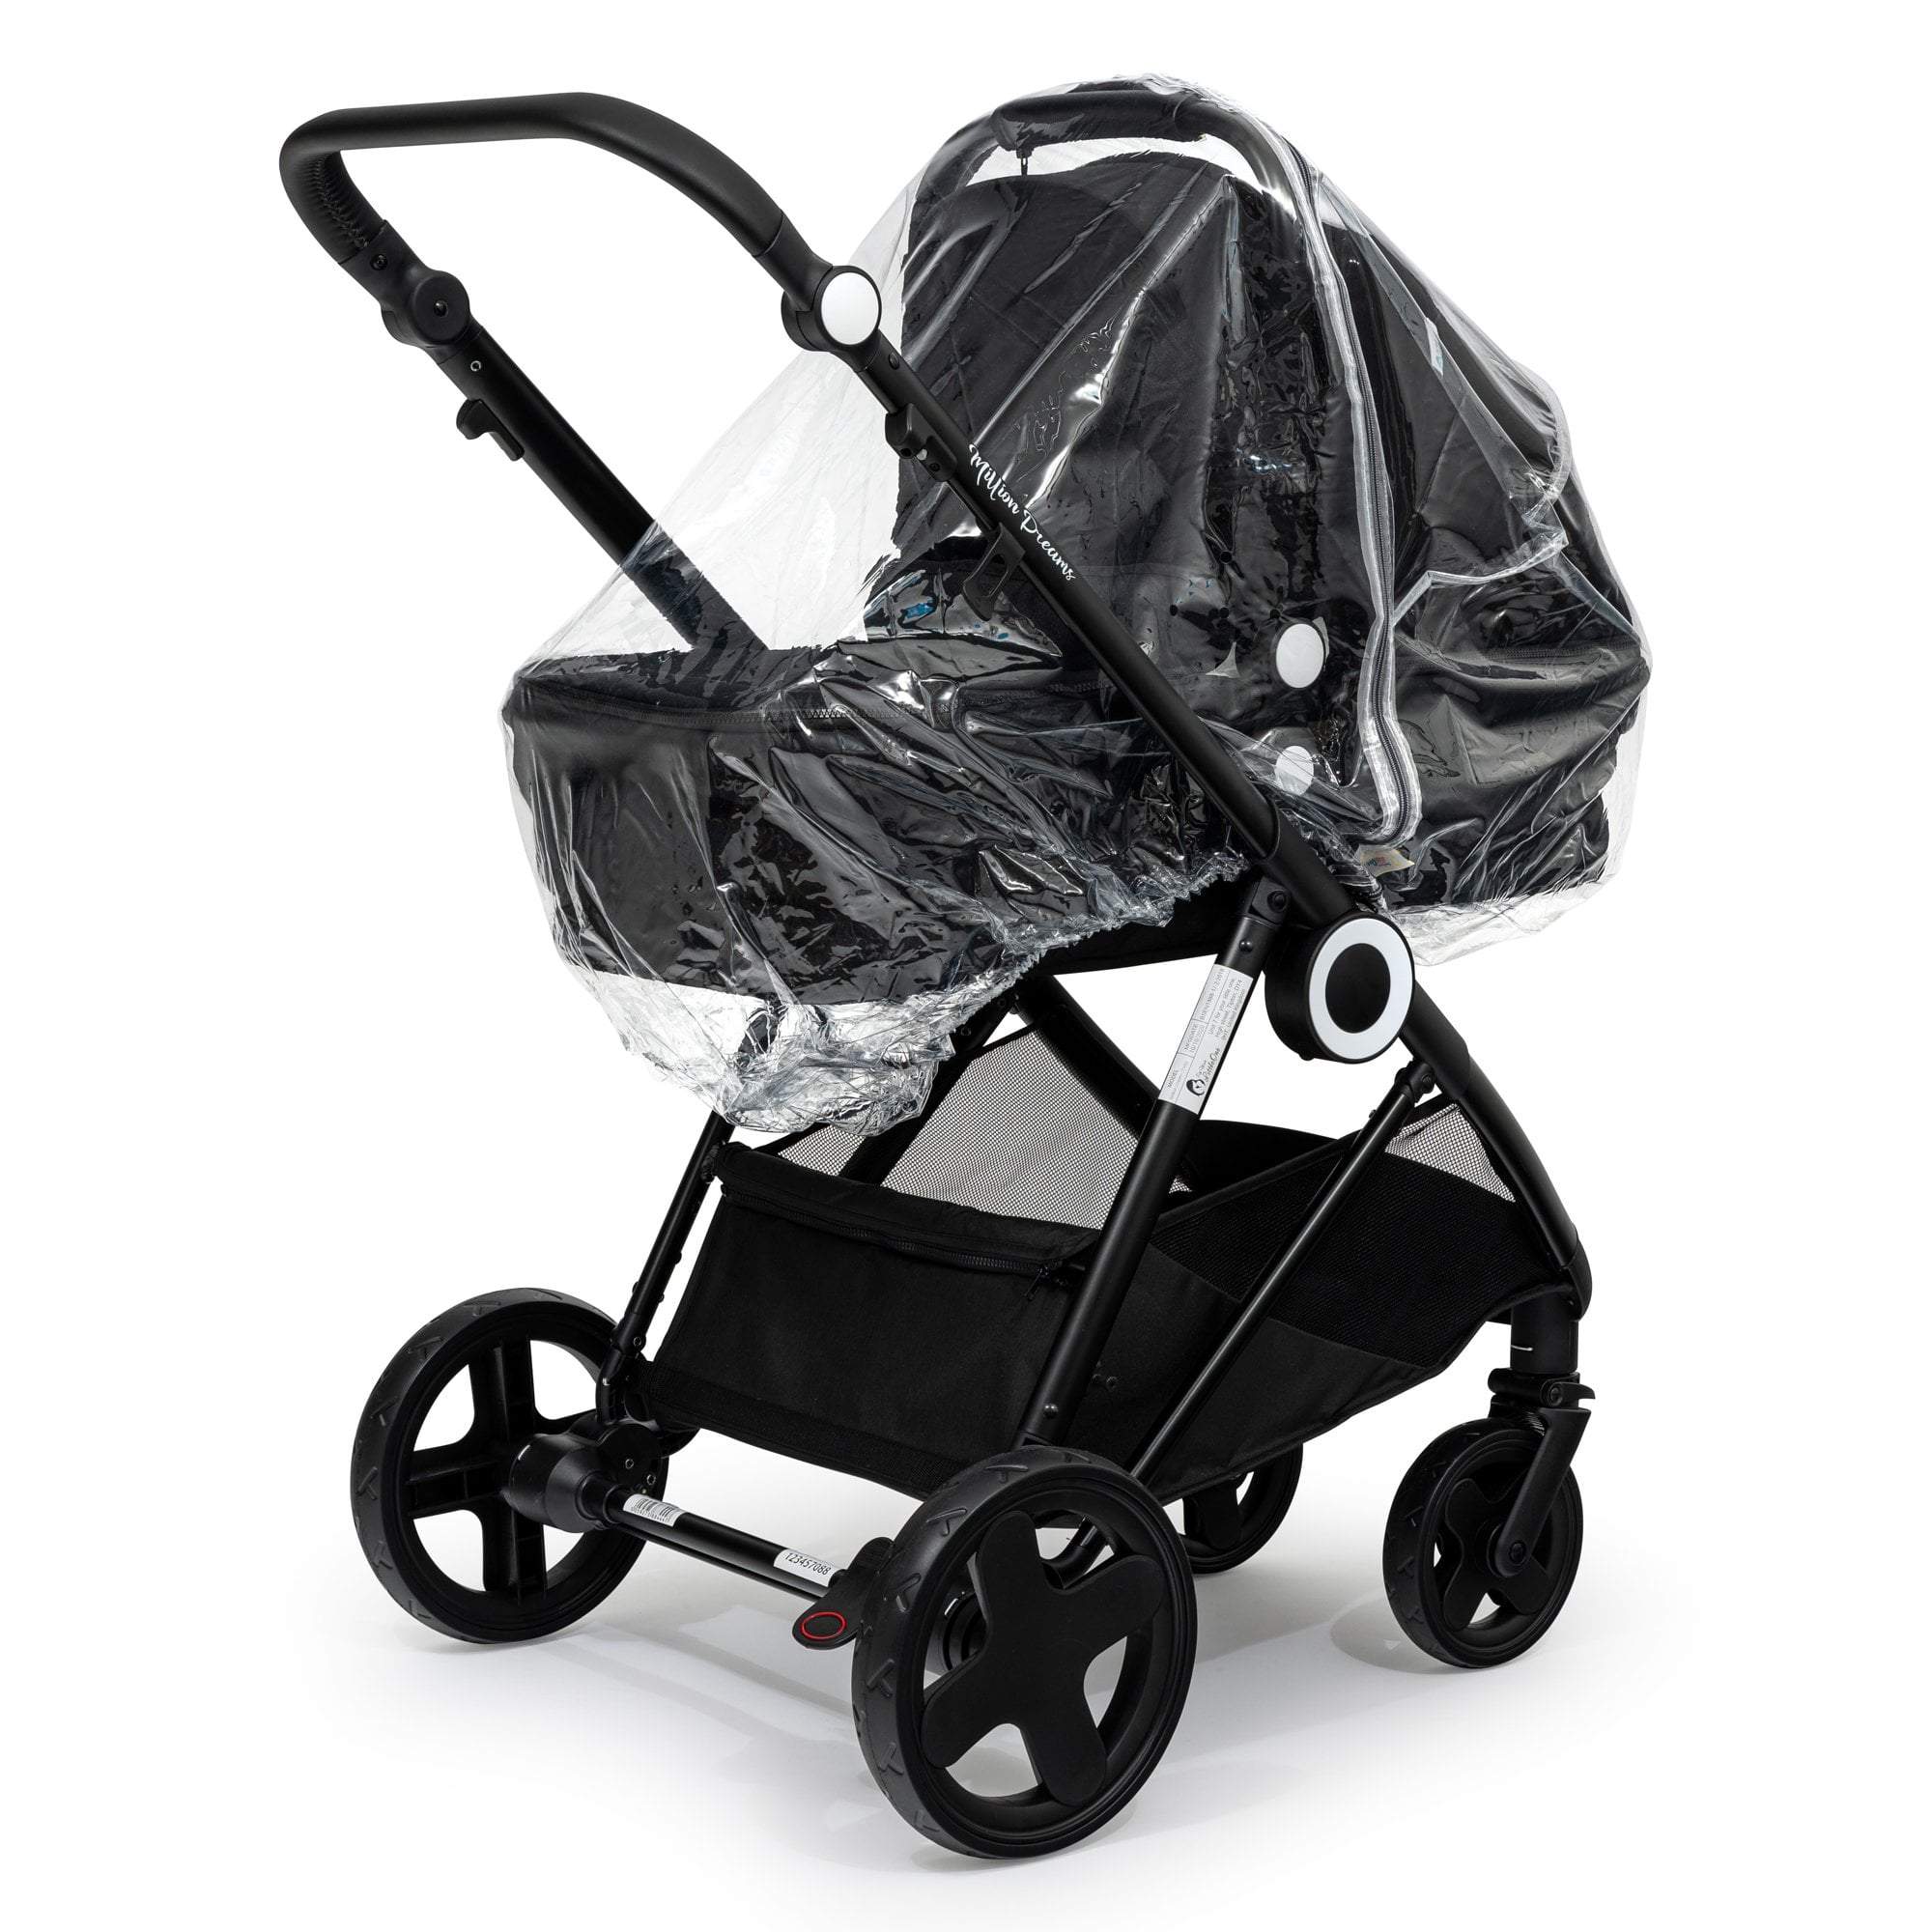 Carrycot Raincover Compatible With Recaro - Fits All Models - For Your Little One